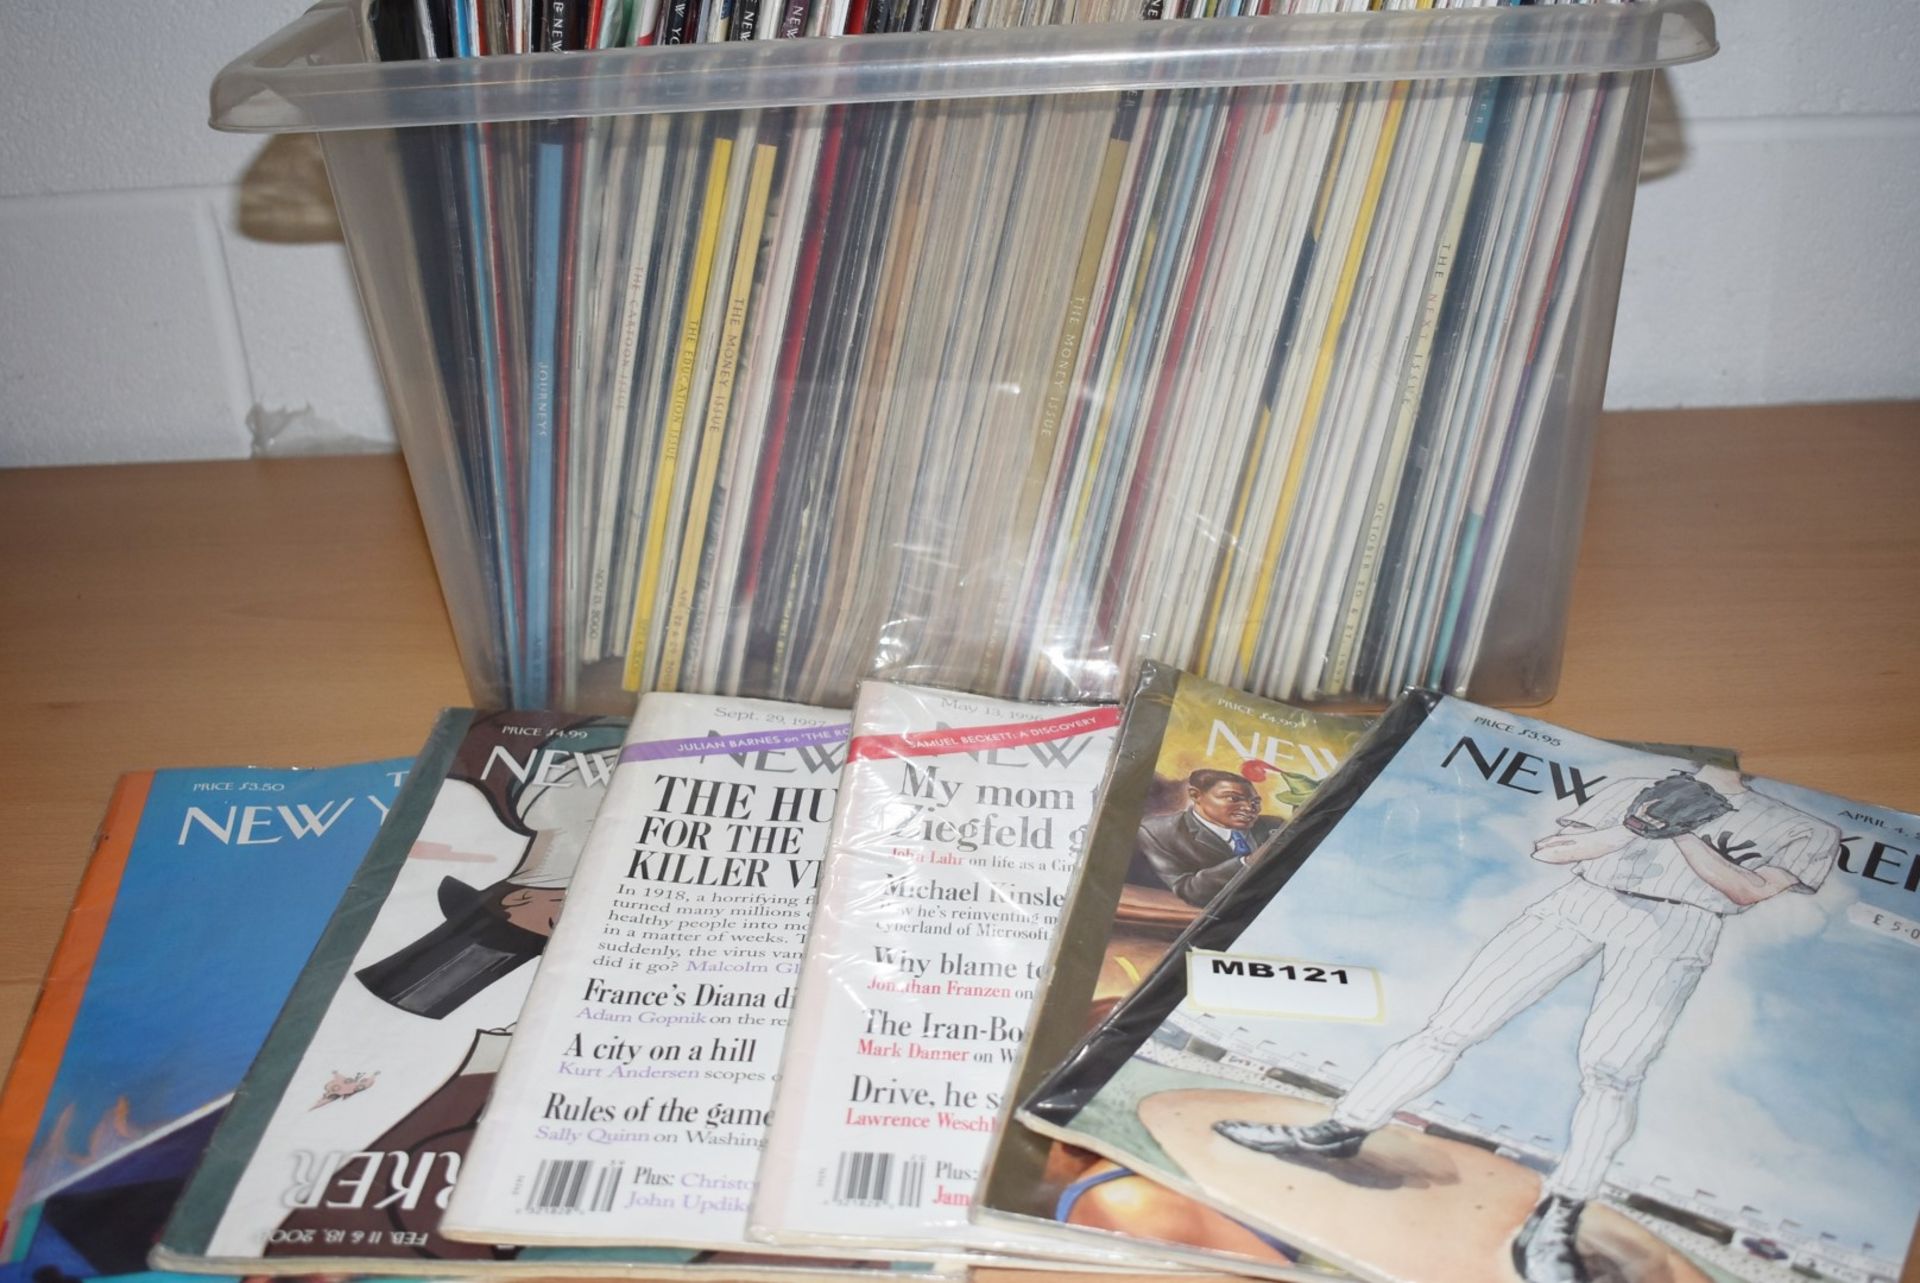 112 x New Yorker Magazines Dated 1997 to 2006 - Ref MB121 - CL431 - Location: Altrincham WA14 - Image 4 of 4